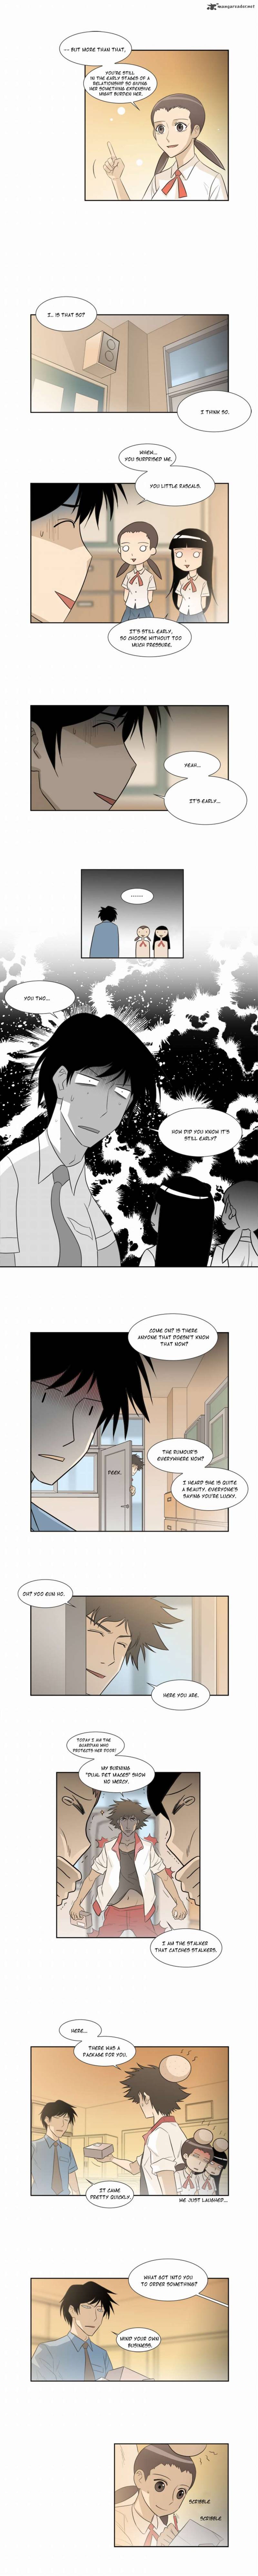 Melo Holic Chapter 18 Page 5